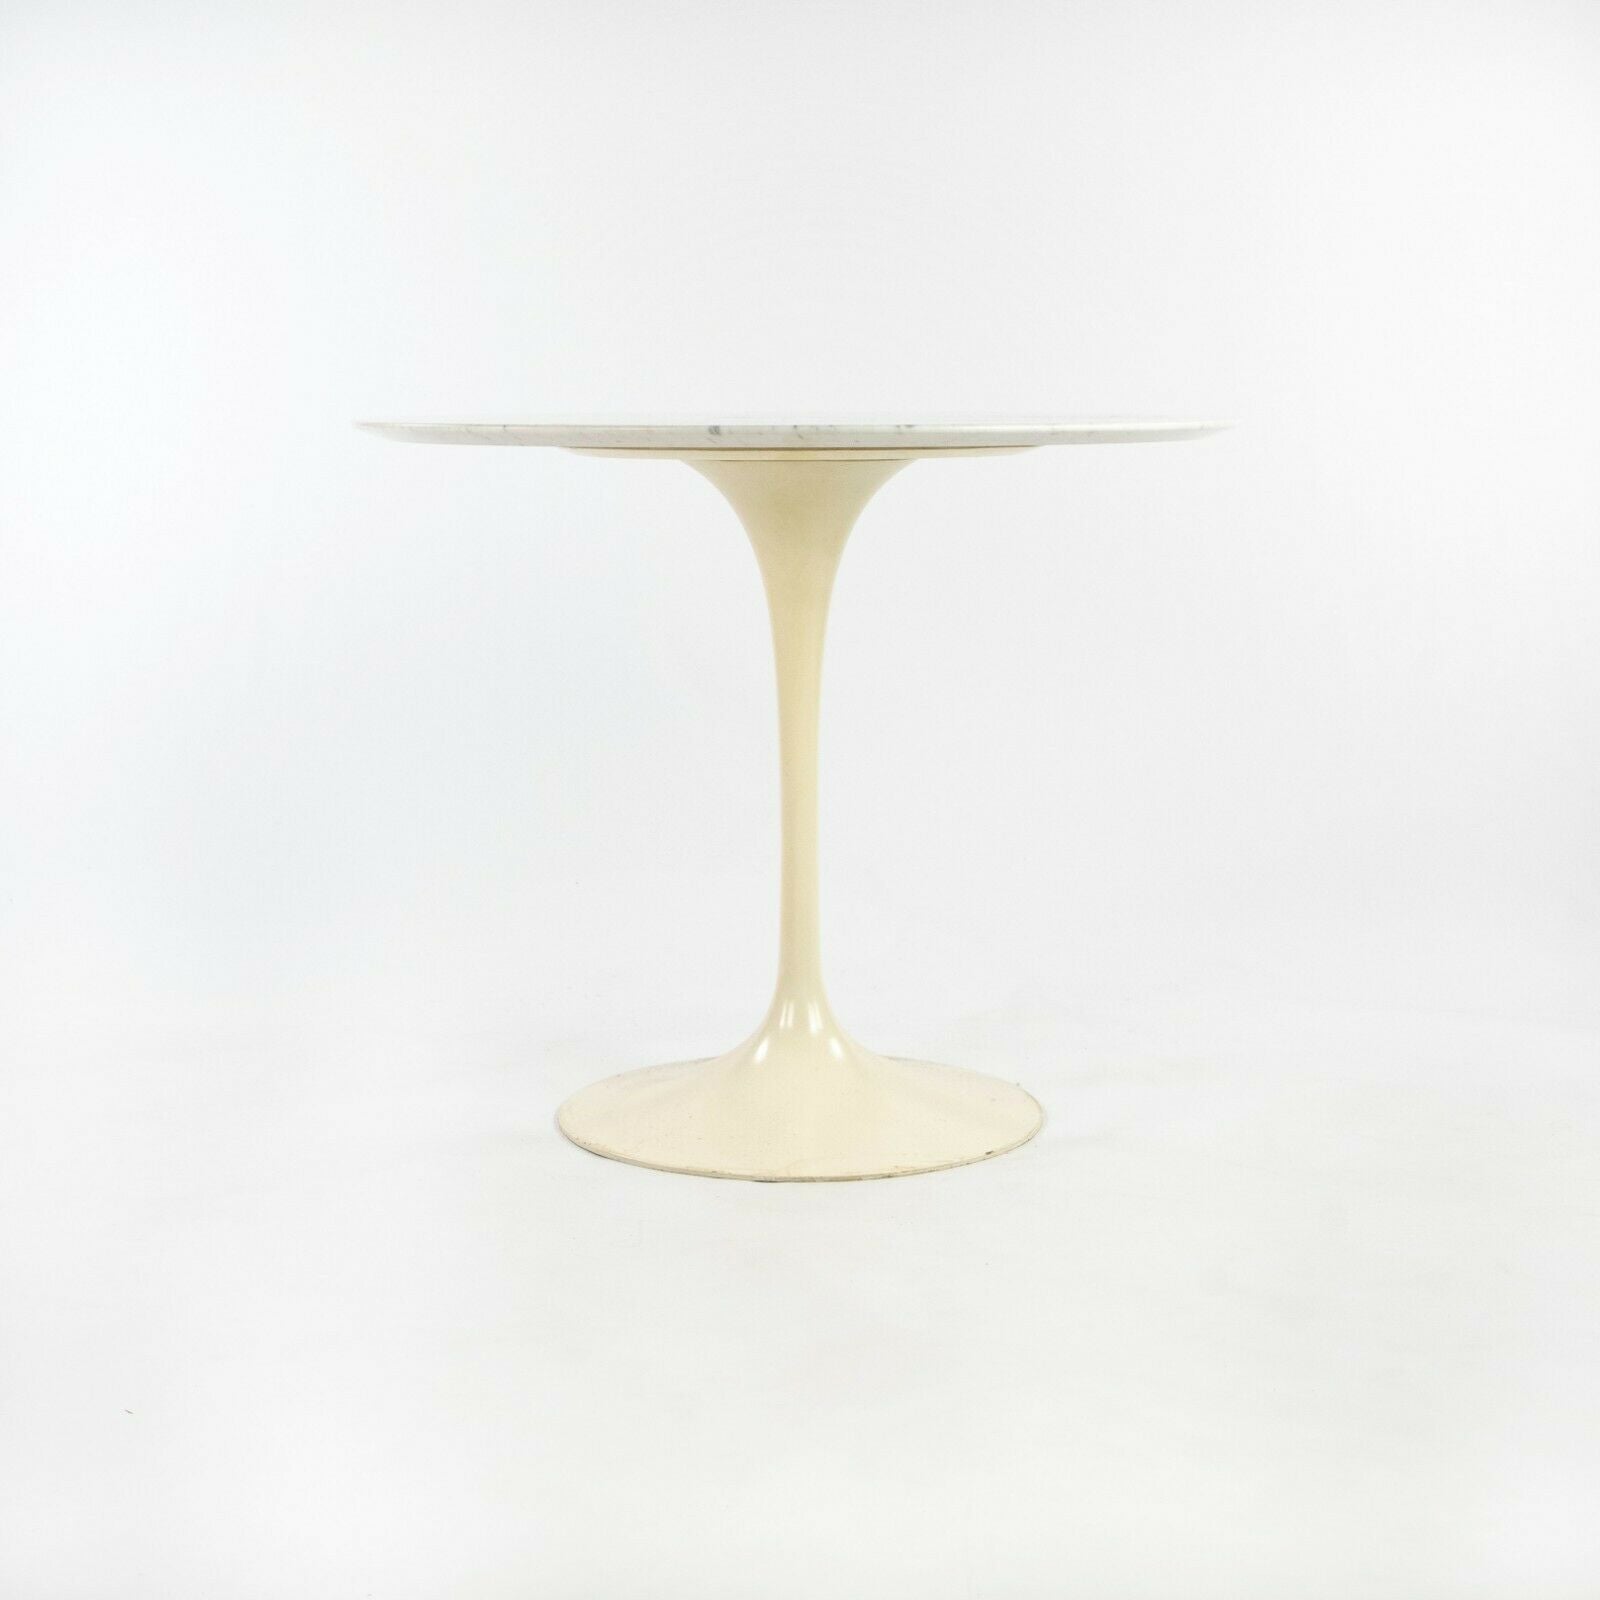 1958 Eero Saarinen for Knoll Associates Early 36 in White Marble Tulip Dining Table